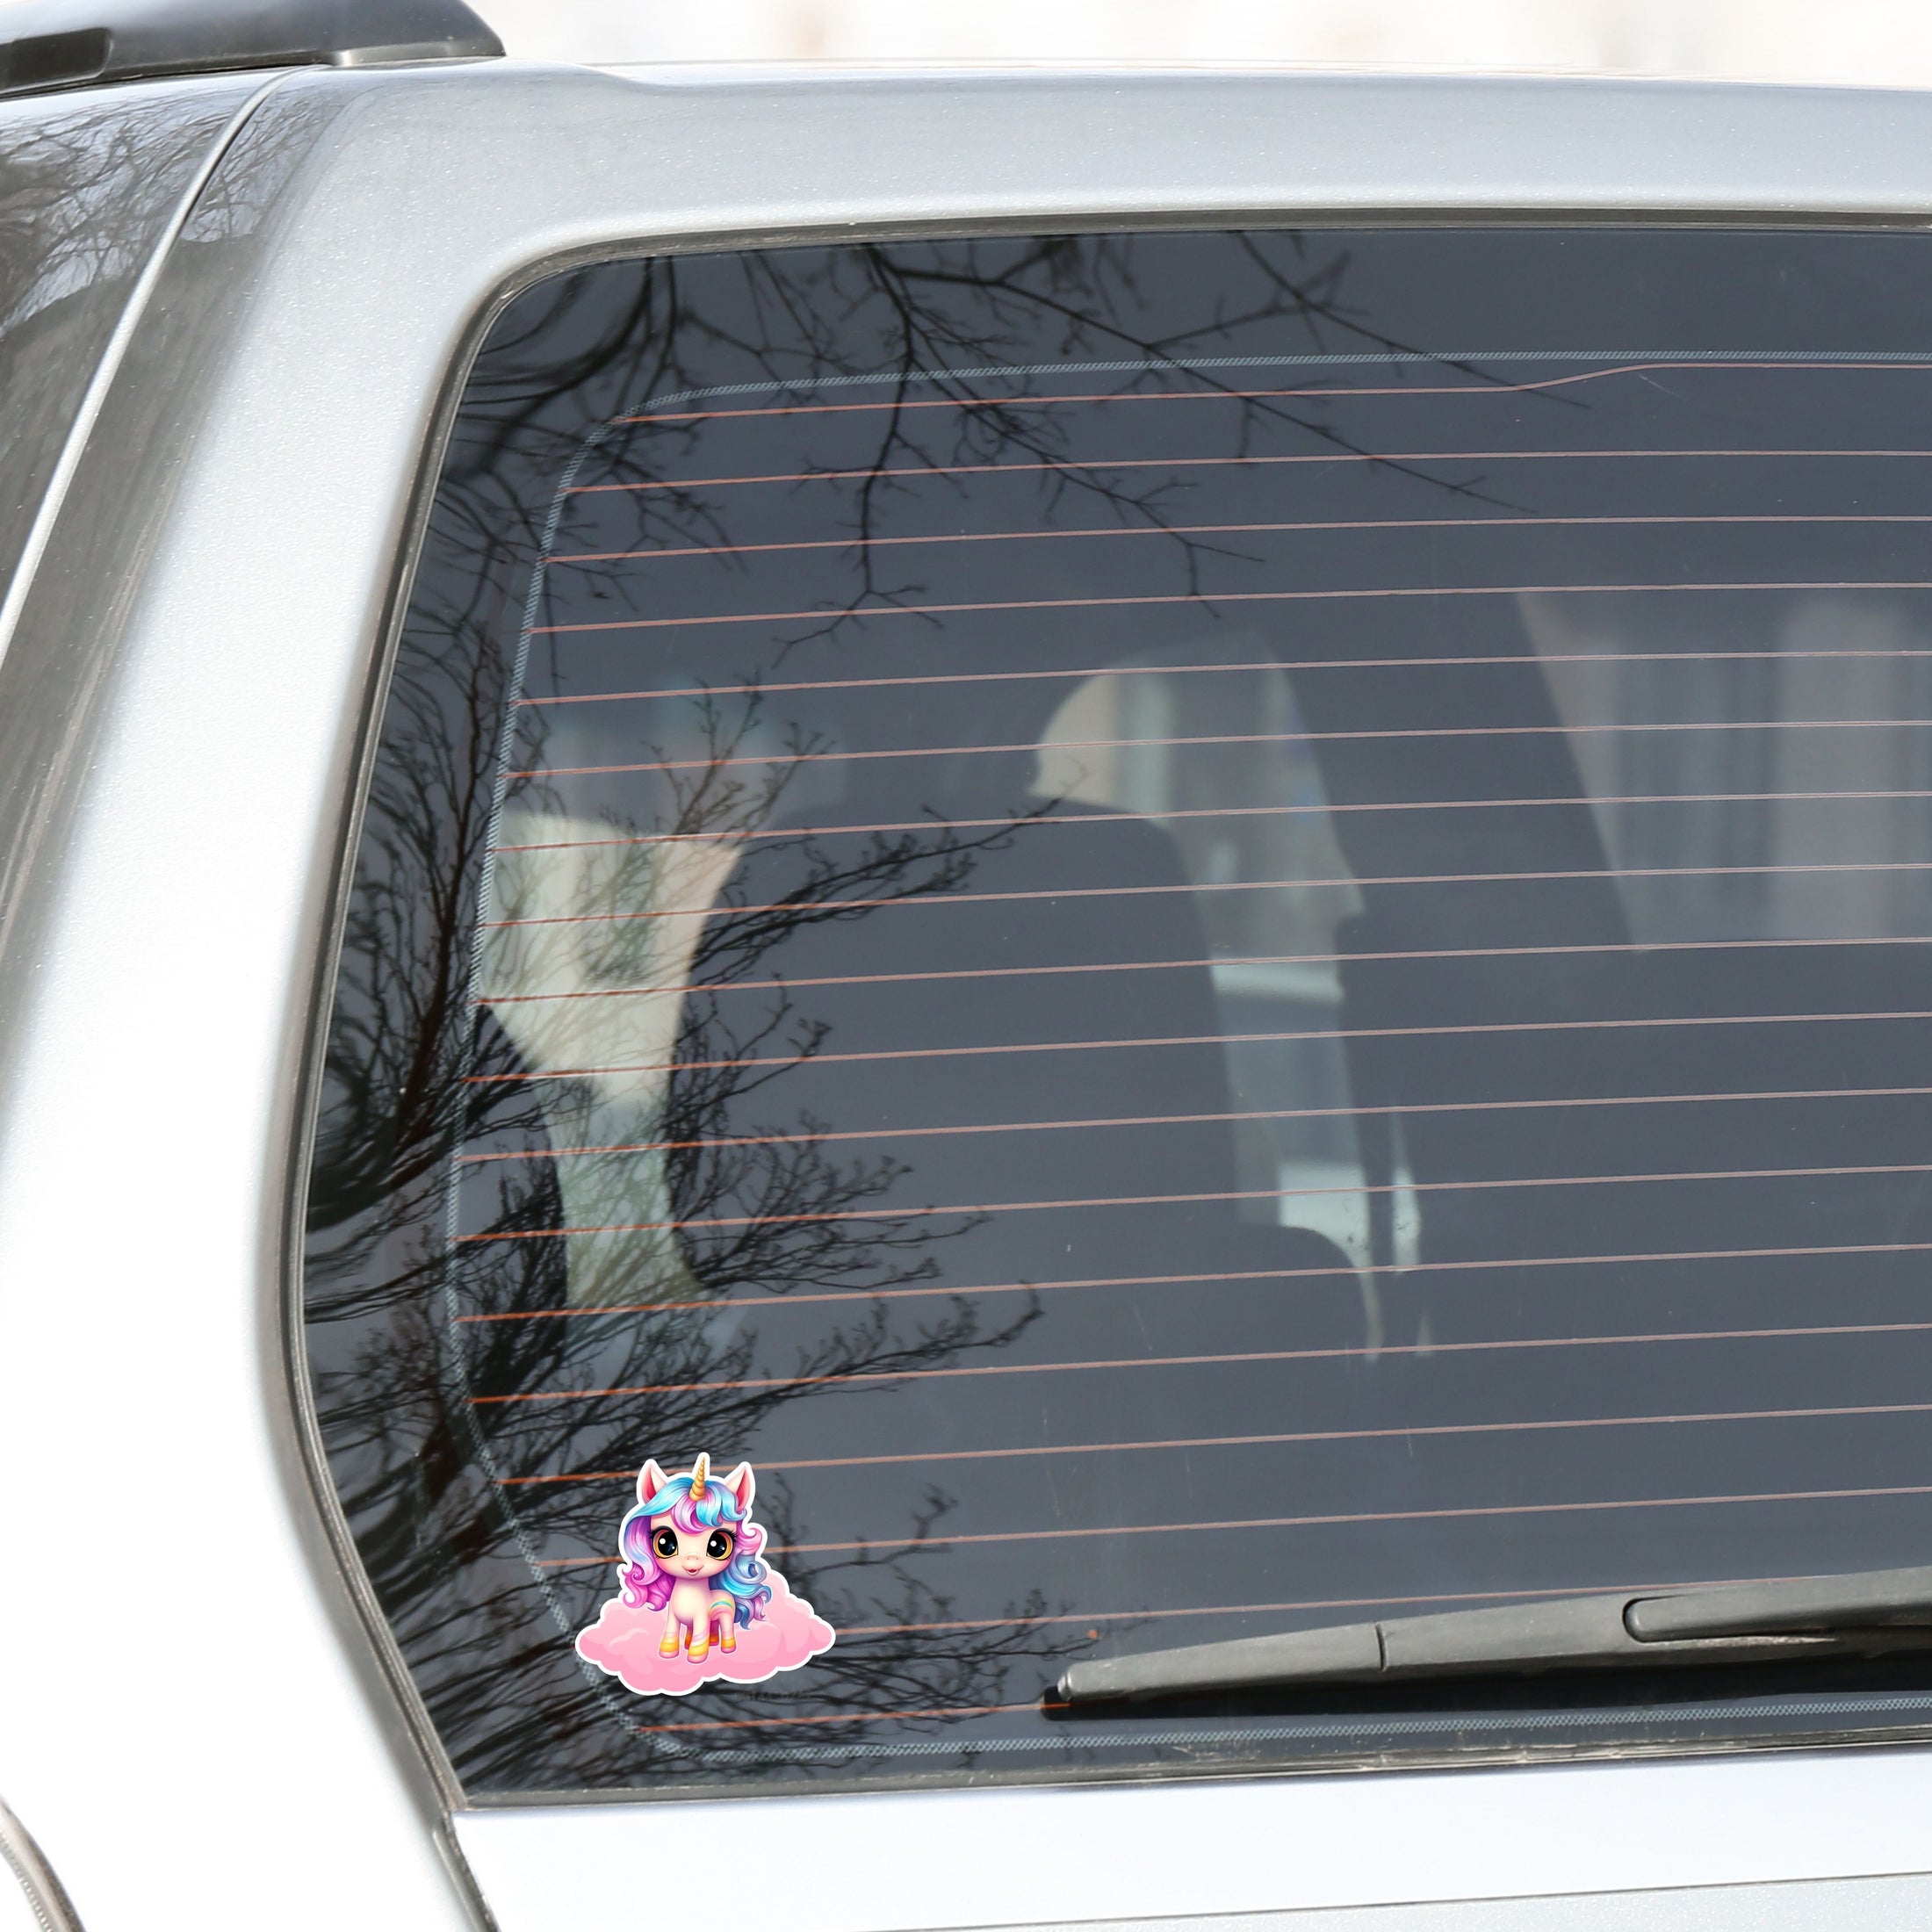 This image shows the pink chibi unicorn sticker on the back window of a car.